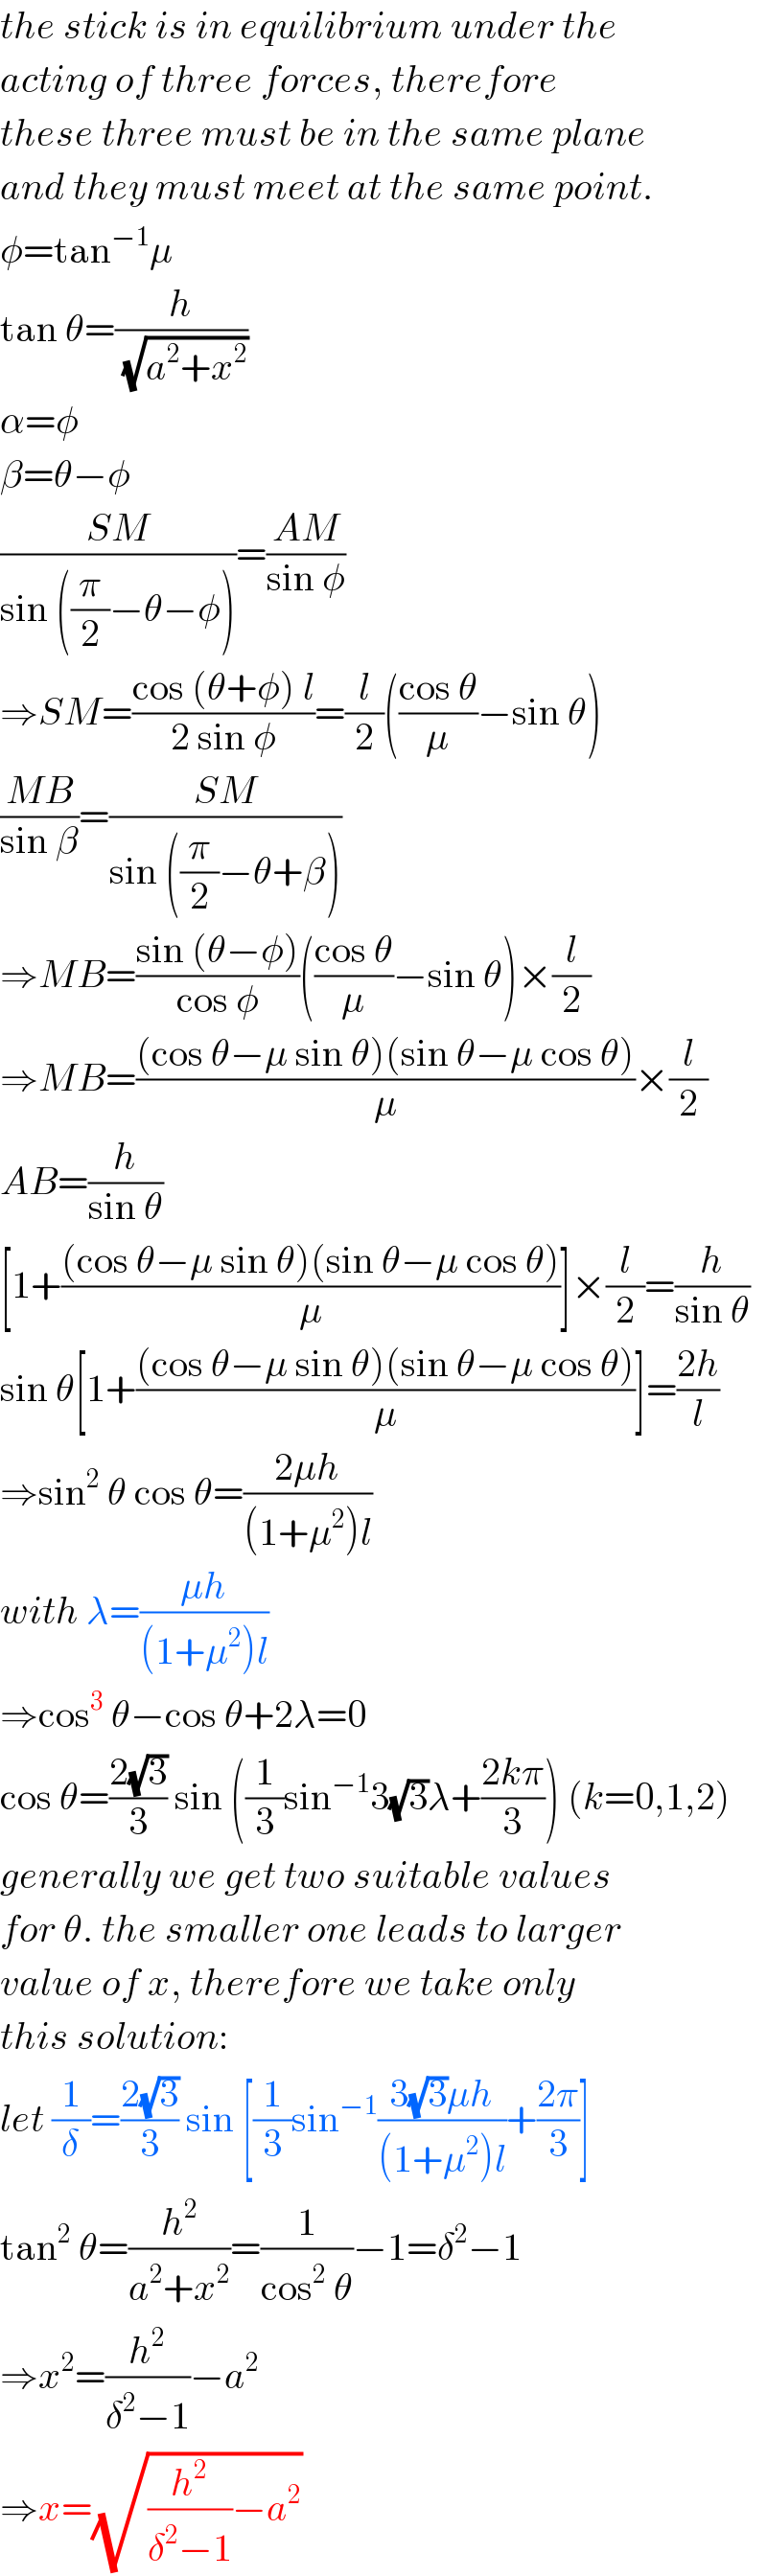 the stick is in equilibrium under the  acting of three forces, therefore  these three must be in the same plane  and they must meet at the same point.  φ=tan^(−1) μ  tan θ=(h/(√(a^2 +x^2 )))  α=φ  β=θ−φ  ((SM)/(sin ((π/2)−θ−φ)))=((AM)/(sin φ))  ⇒SM=((cos (θ+φ) l)/(2 sin φ))=(l/2)(((cos θ)/μ)−sin θ)  ((MB)/(sin β))=((SM)/(sin ((π/2)−θ+β)))  ⇒MB=((sin (θ−φ))/(cos φ))(((cos θ)/μ)−sin θ)×(l/2)  ⇒MB=(((cos θ−μ sin θ)(sin θ−μ cos θ))/μ)×(l/2)  AB=(h/(sin θ))  [1+(((cos θ−μ sin θ)(sin θ−μ cos θ))/μ)]×(l/2)=(h/(sin θ))  sin θ[1+(((cos θ−μ sin θ)(sin θ−μ cos θ))/μ)]=((2h)/l)  ⇒sin^2  θ cos θ=((2μh)/((1+μ^2 )l))  with λ=((μh)/((1+μ^2 )l))  ⇒cos^3  θ−cos θ+2λ=0  cos θ=((2(√3))/3) sin ((1/3)sin^(−1) 3(√3)λ+((2kπ)/3)) (k=0,1,2)  generally we get two suitable values  for θ. the smaller one leads to larger  value of x, therefore we take only  this solution:  let (1/δ)=((2(√3))/3) sin [(1/3)sin^(−1) ((3(√3)μh)/((1+μ^2 )l))+((2π)/3)]  tan^2  θ=(h^2 /(a^2 +x^2 ))=(1/(cos^2  θ))−1=δ^2 −1  ⇒x^2 =(h^2 /(δ^2 −1))−a^2   ⇒x=(√((h^2 /(δ^2 −1))−a^2 ))  